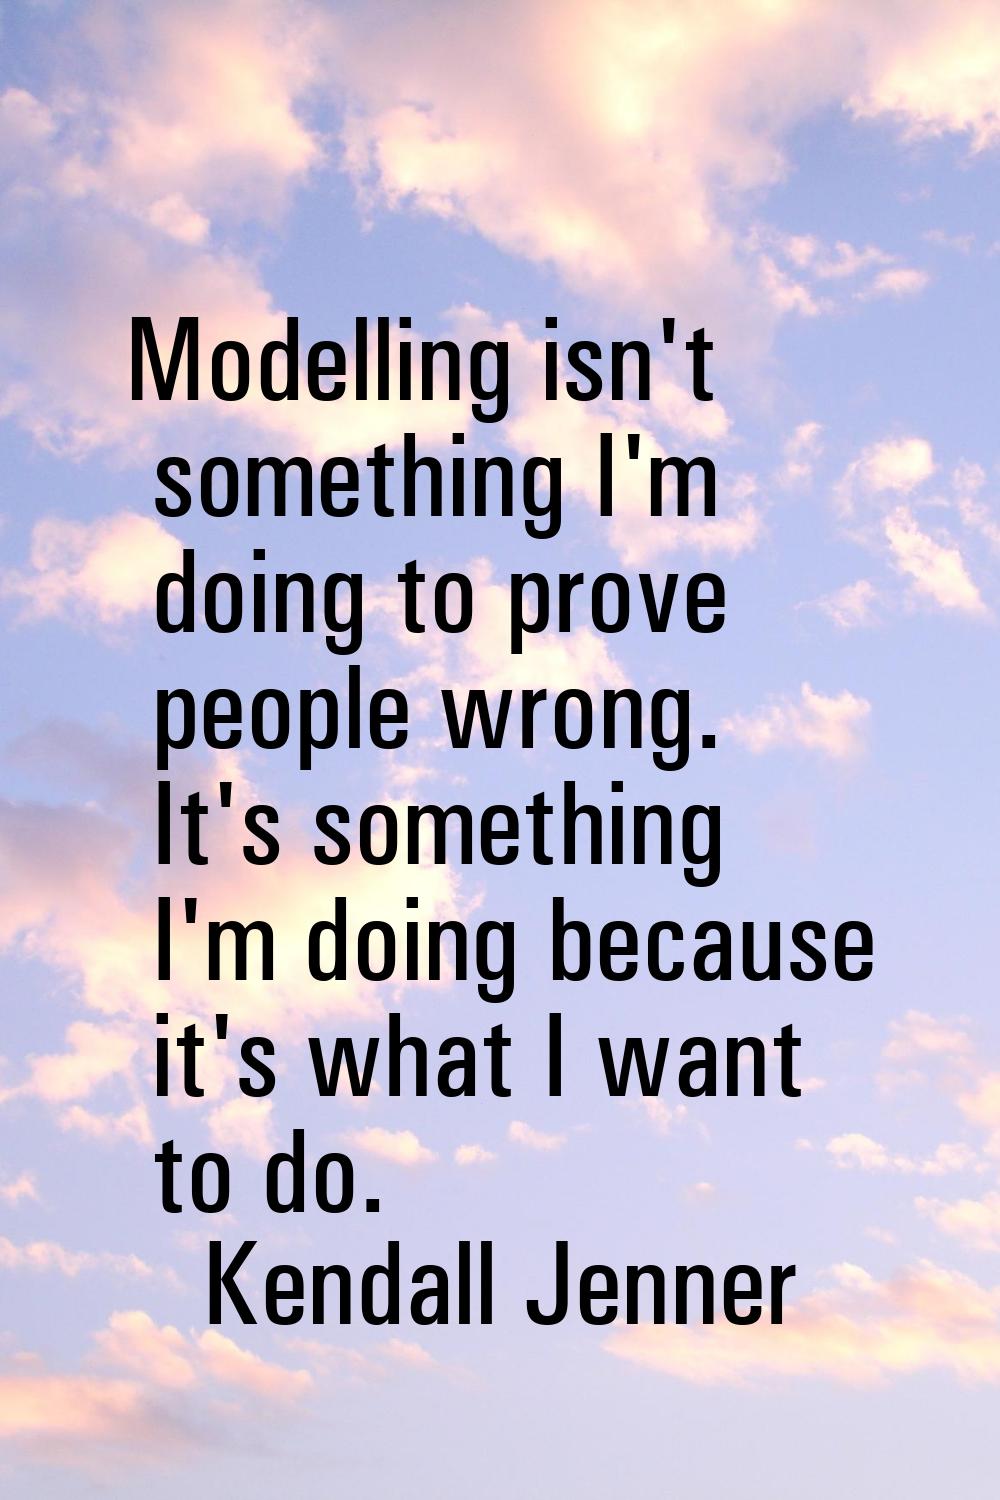 Modelling isn't something I'm doing to prove people wrong. It's something I'm doing because it's wh